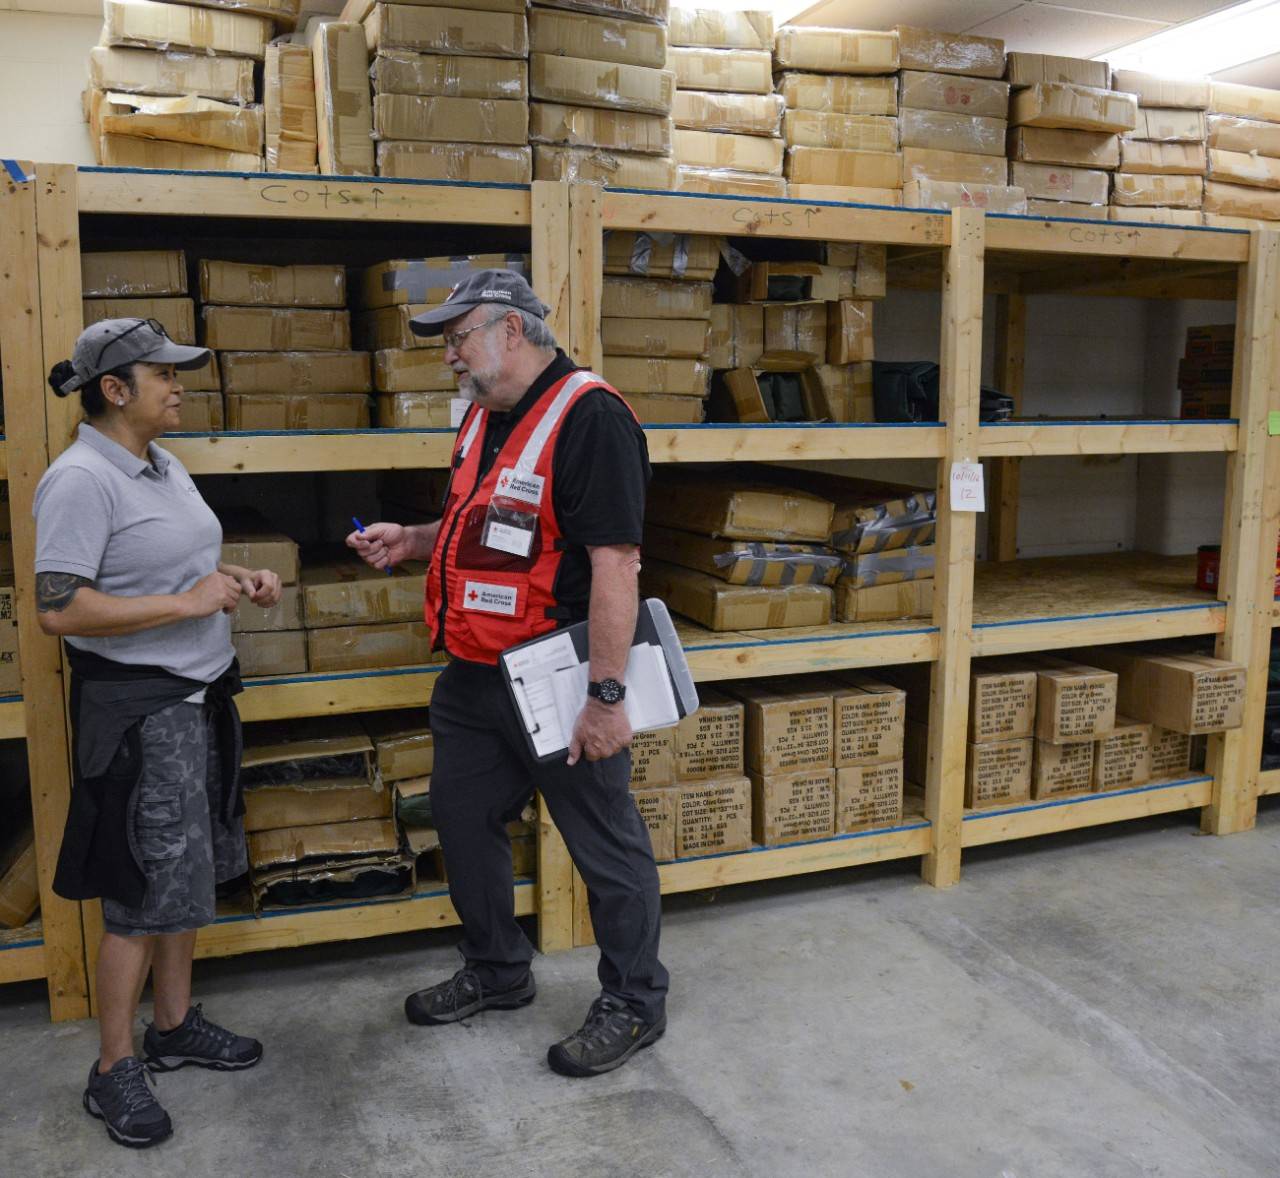 Myrtle Beach, South Carolina, September 6, 2019. American Red Cross volunteer Maria Millan explains to Red Cross volunteer Bob Wallace the warehouse operation and distribution of disaster supplies to people who have been affected by Hurricane Dorian. Maria is a Logistics Generalist Manager for the South Carolina disaster response. Over the past 5 years, she has been a volunteer responder to approximately 44 disaster response operations. When not responding to disasters, Maria serves as the Red Cross Logistics Regional Lead volunteer for the state of New York.Photo Credit: Daniel Cima/American Red Cross